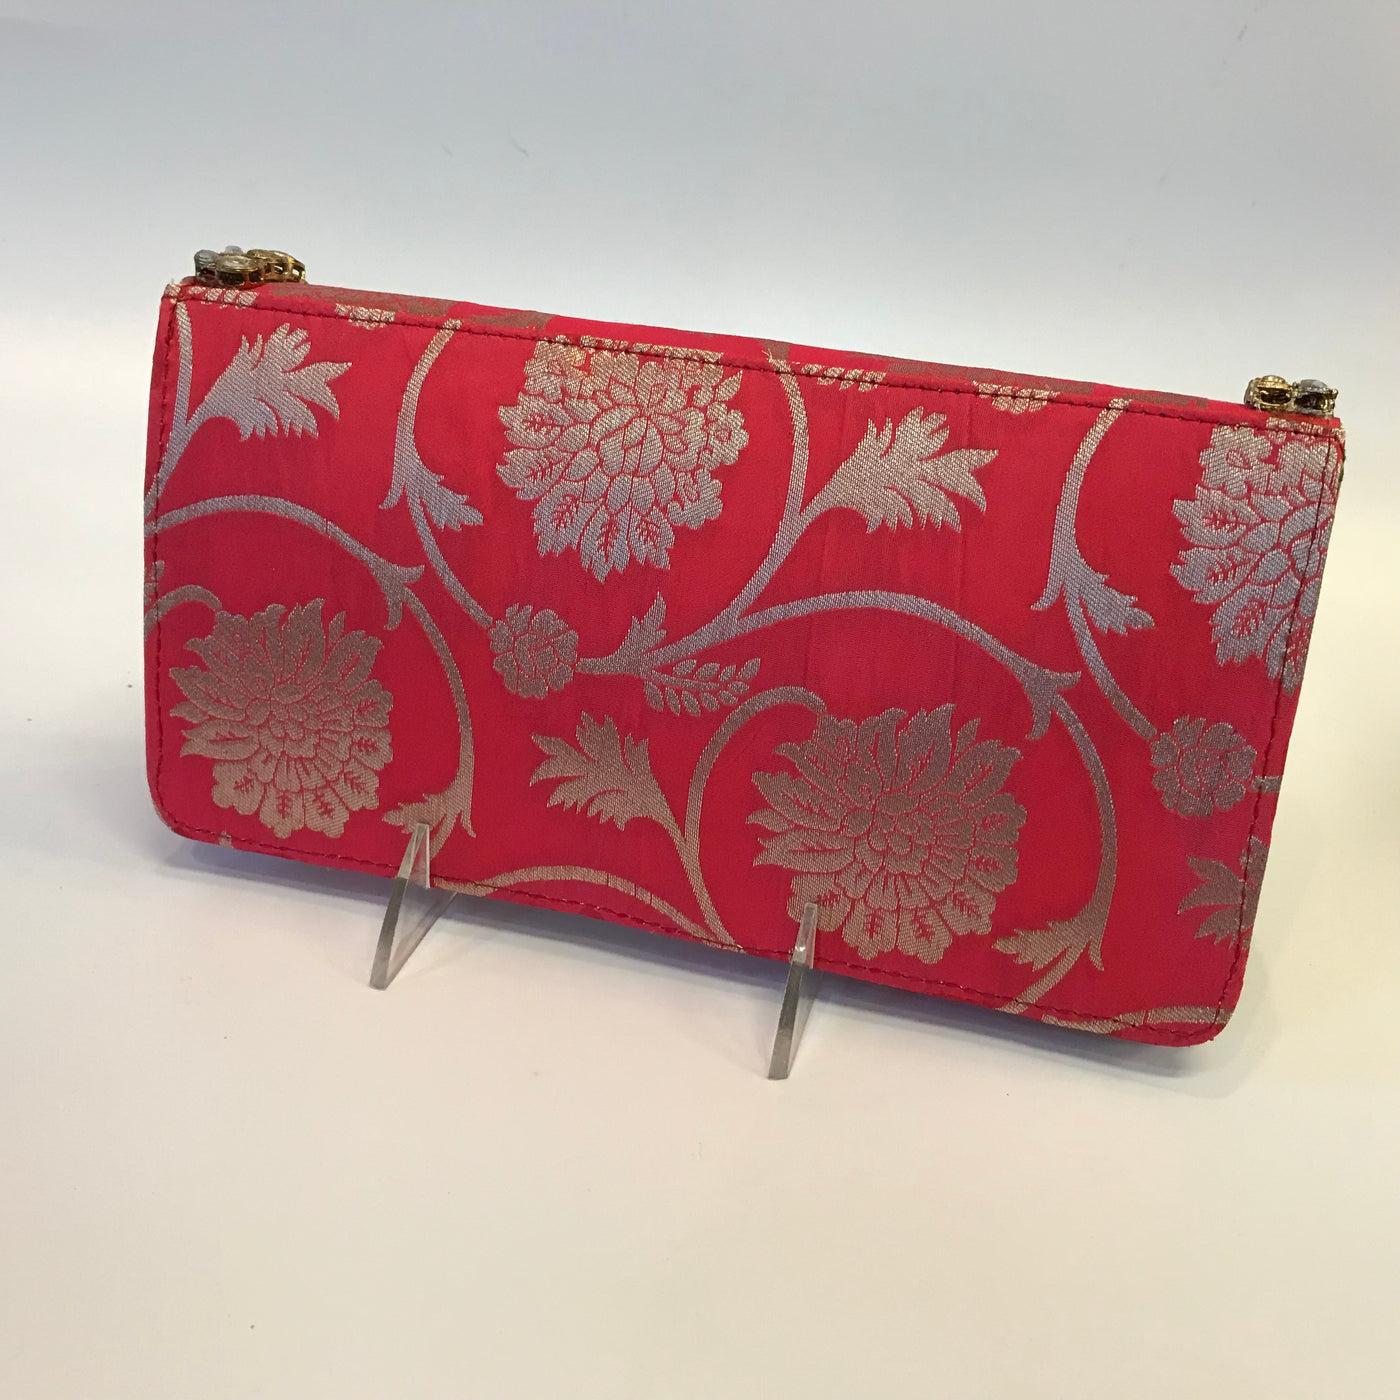 Embroidered Silk Clutch bags - Thecraftroot